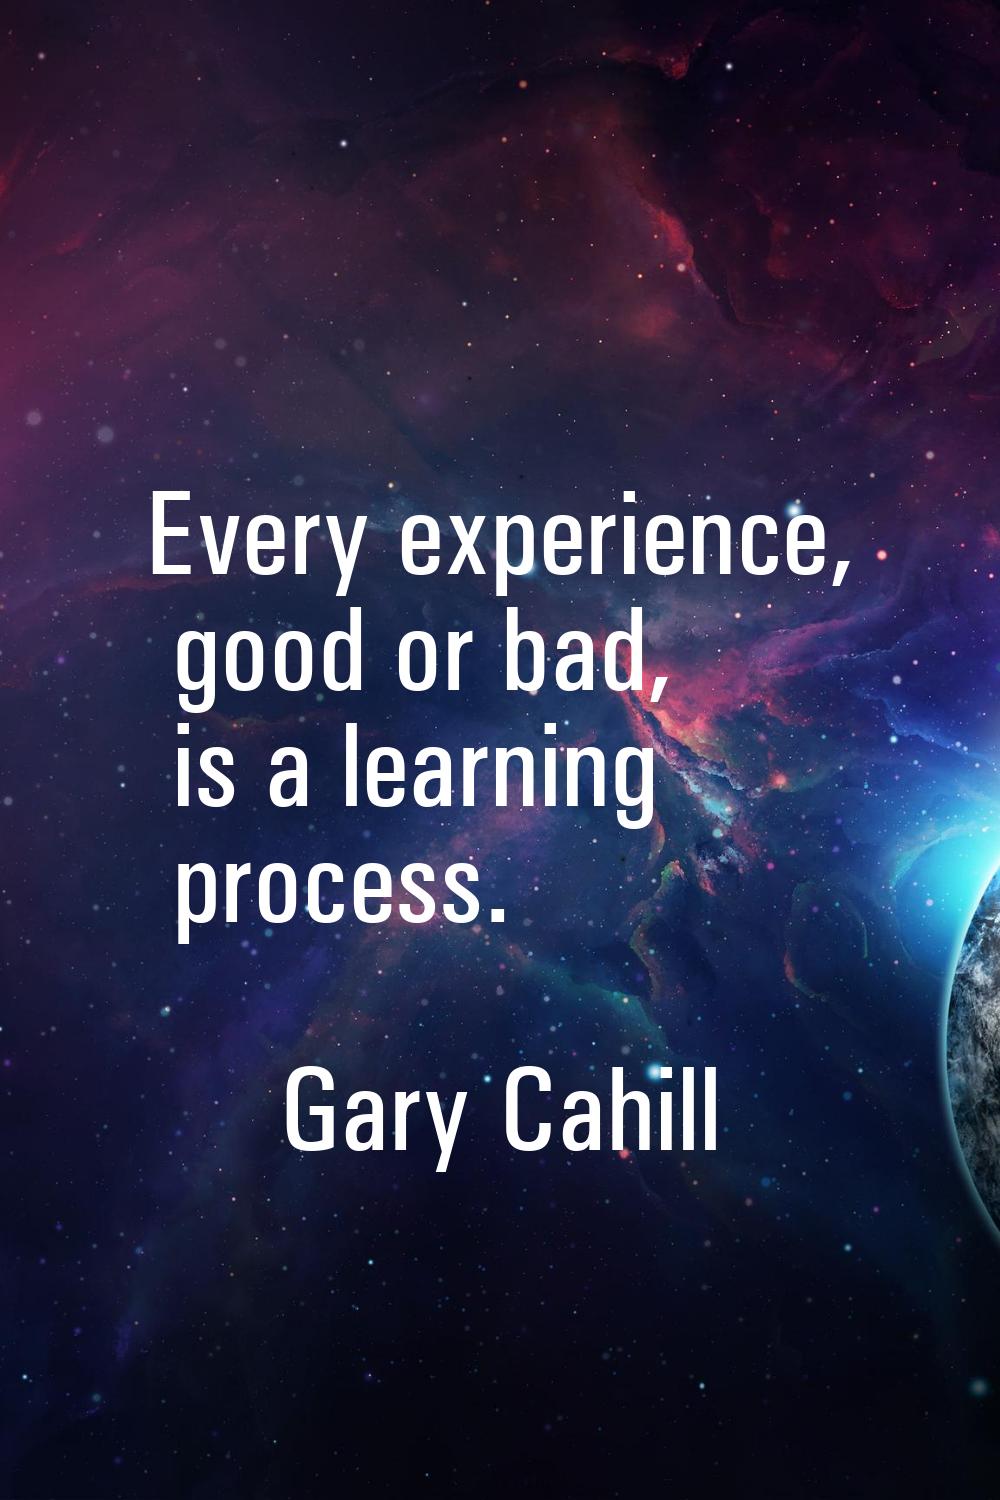 Every experience, good or bad, is a learning process.